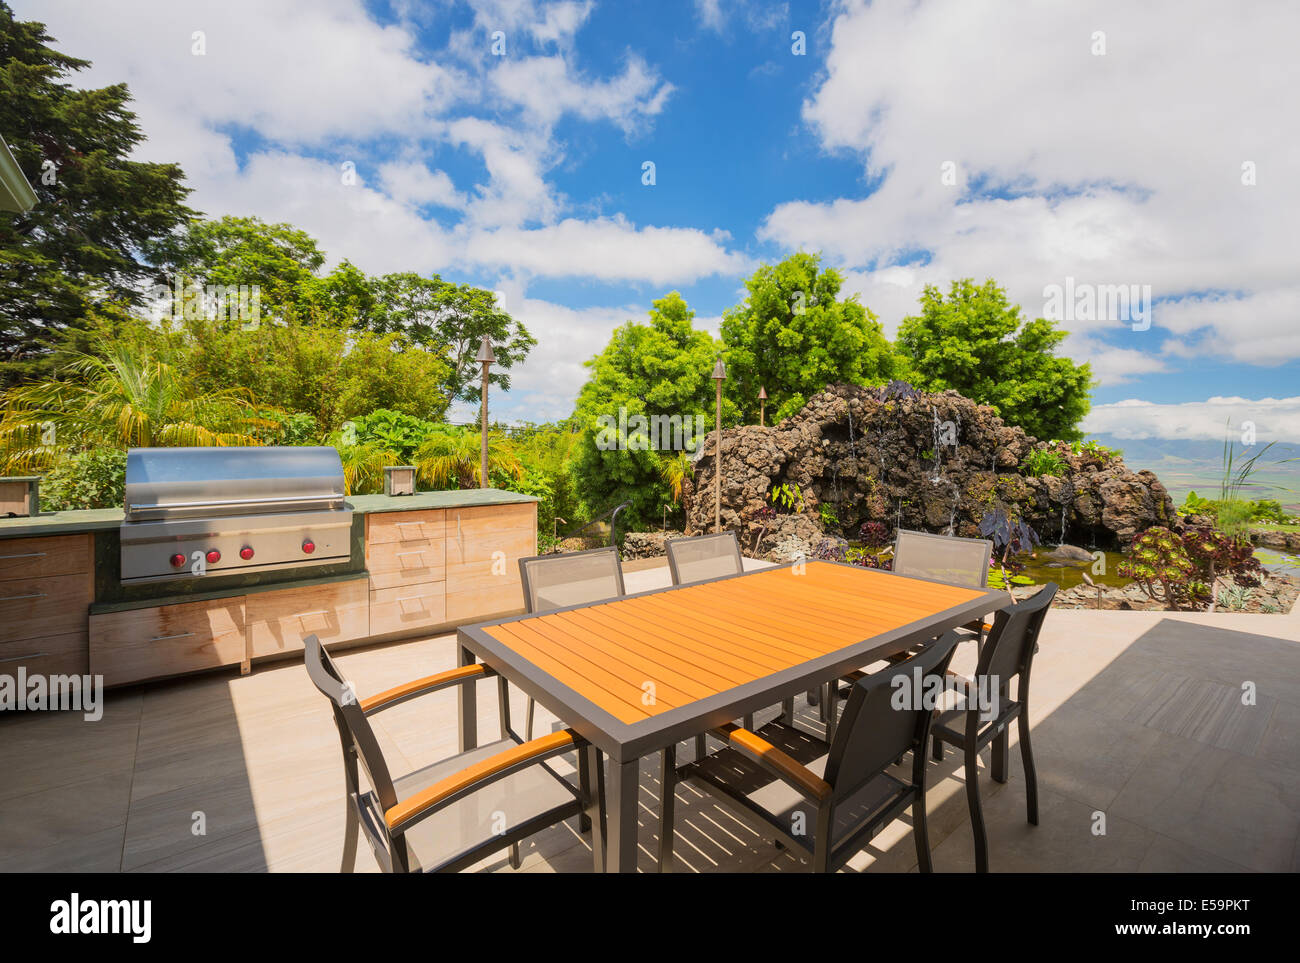 Backyard patio with BBQ grill and dining table on deck Stock Photo